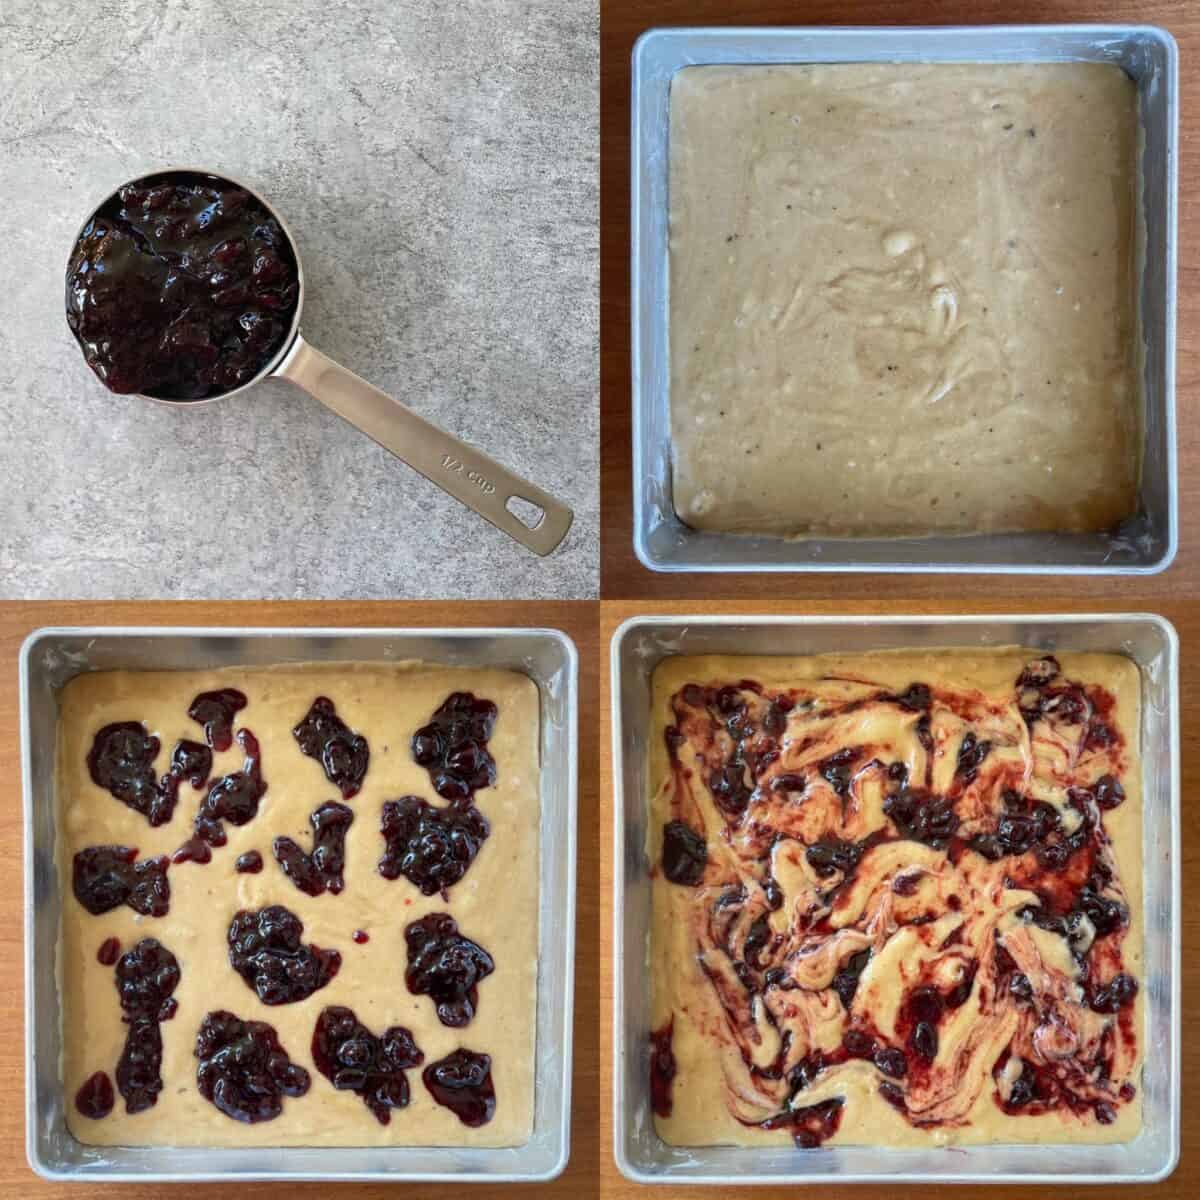 four panels showing the steps in swirling the cup of jam  in the first panel into the batter in the square pan in the second. The third panel shows jam dolloped over the batter, and fourth shows the jam swirled in.